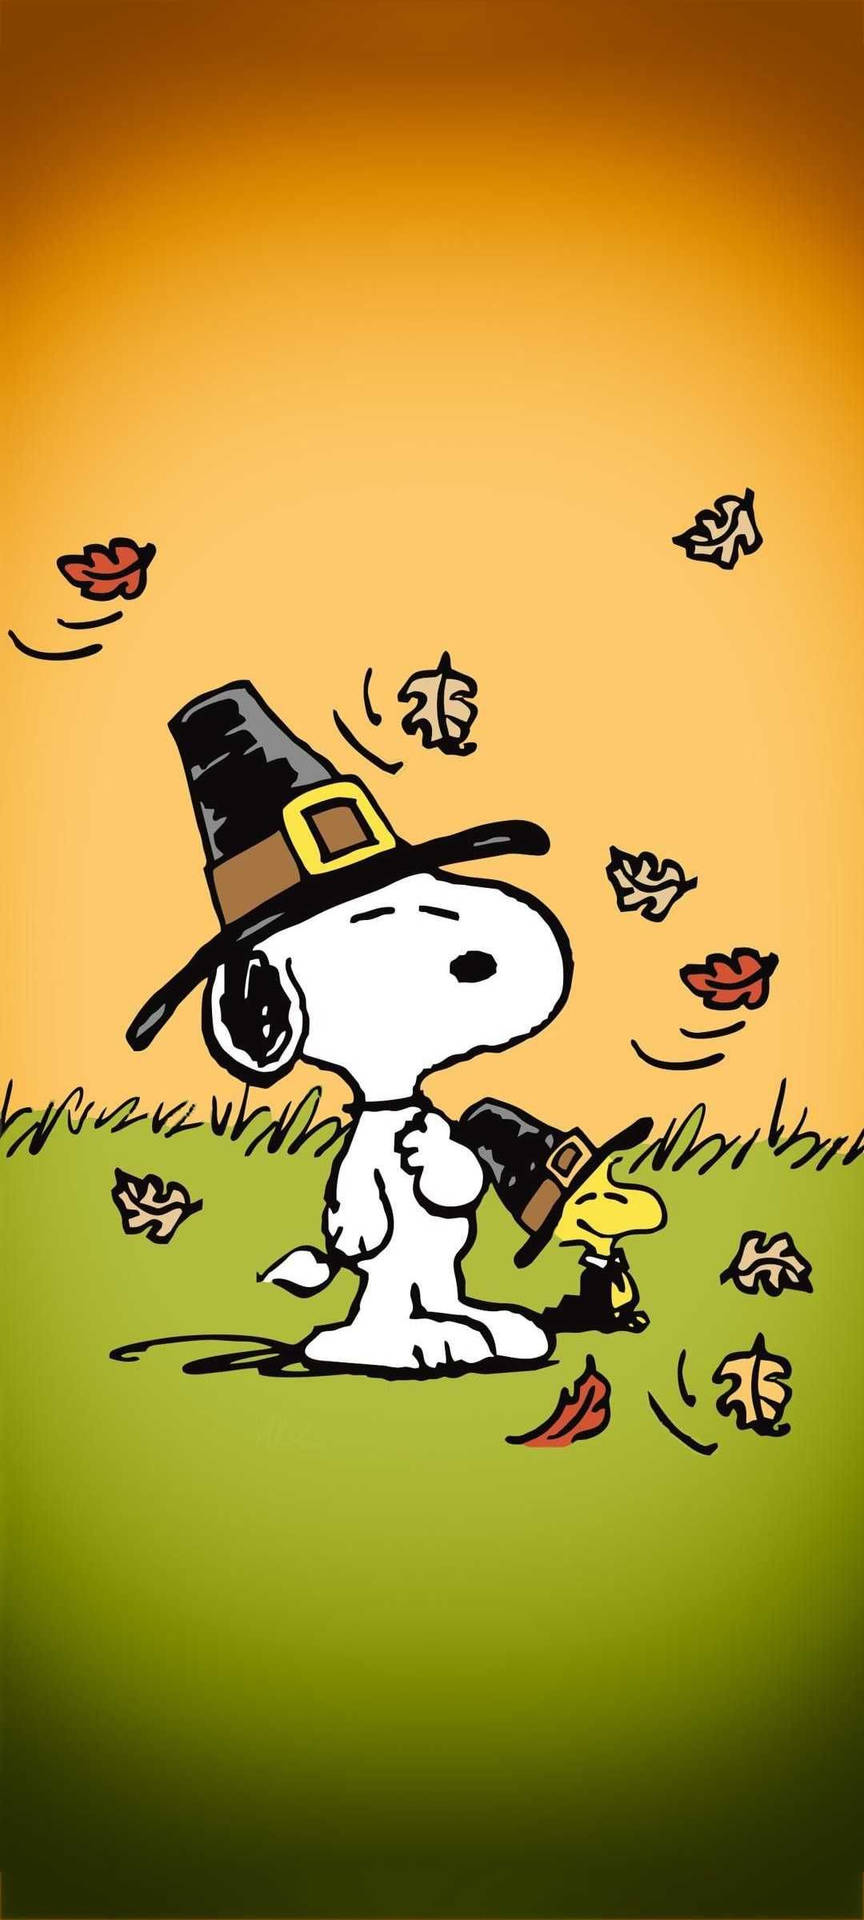 Trick Or Treat With Snoopy! Wallpaper